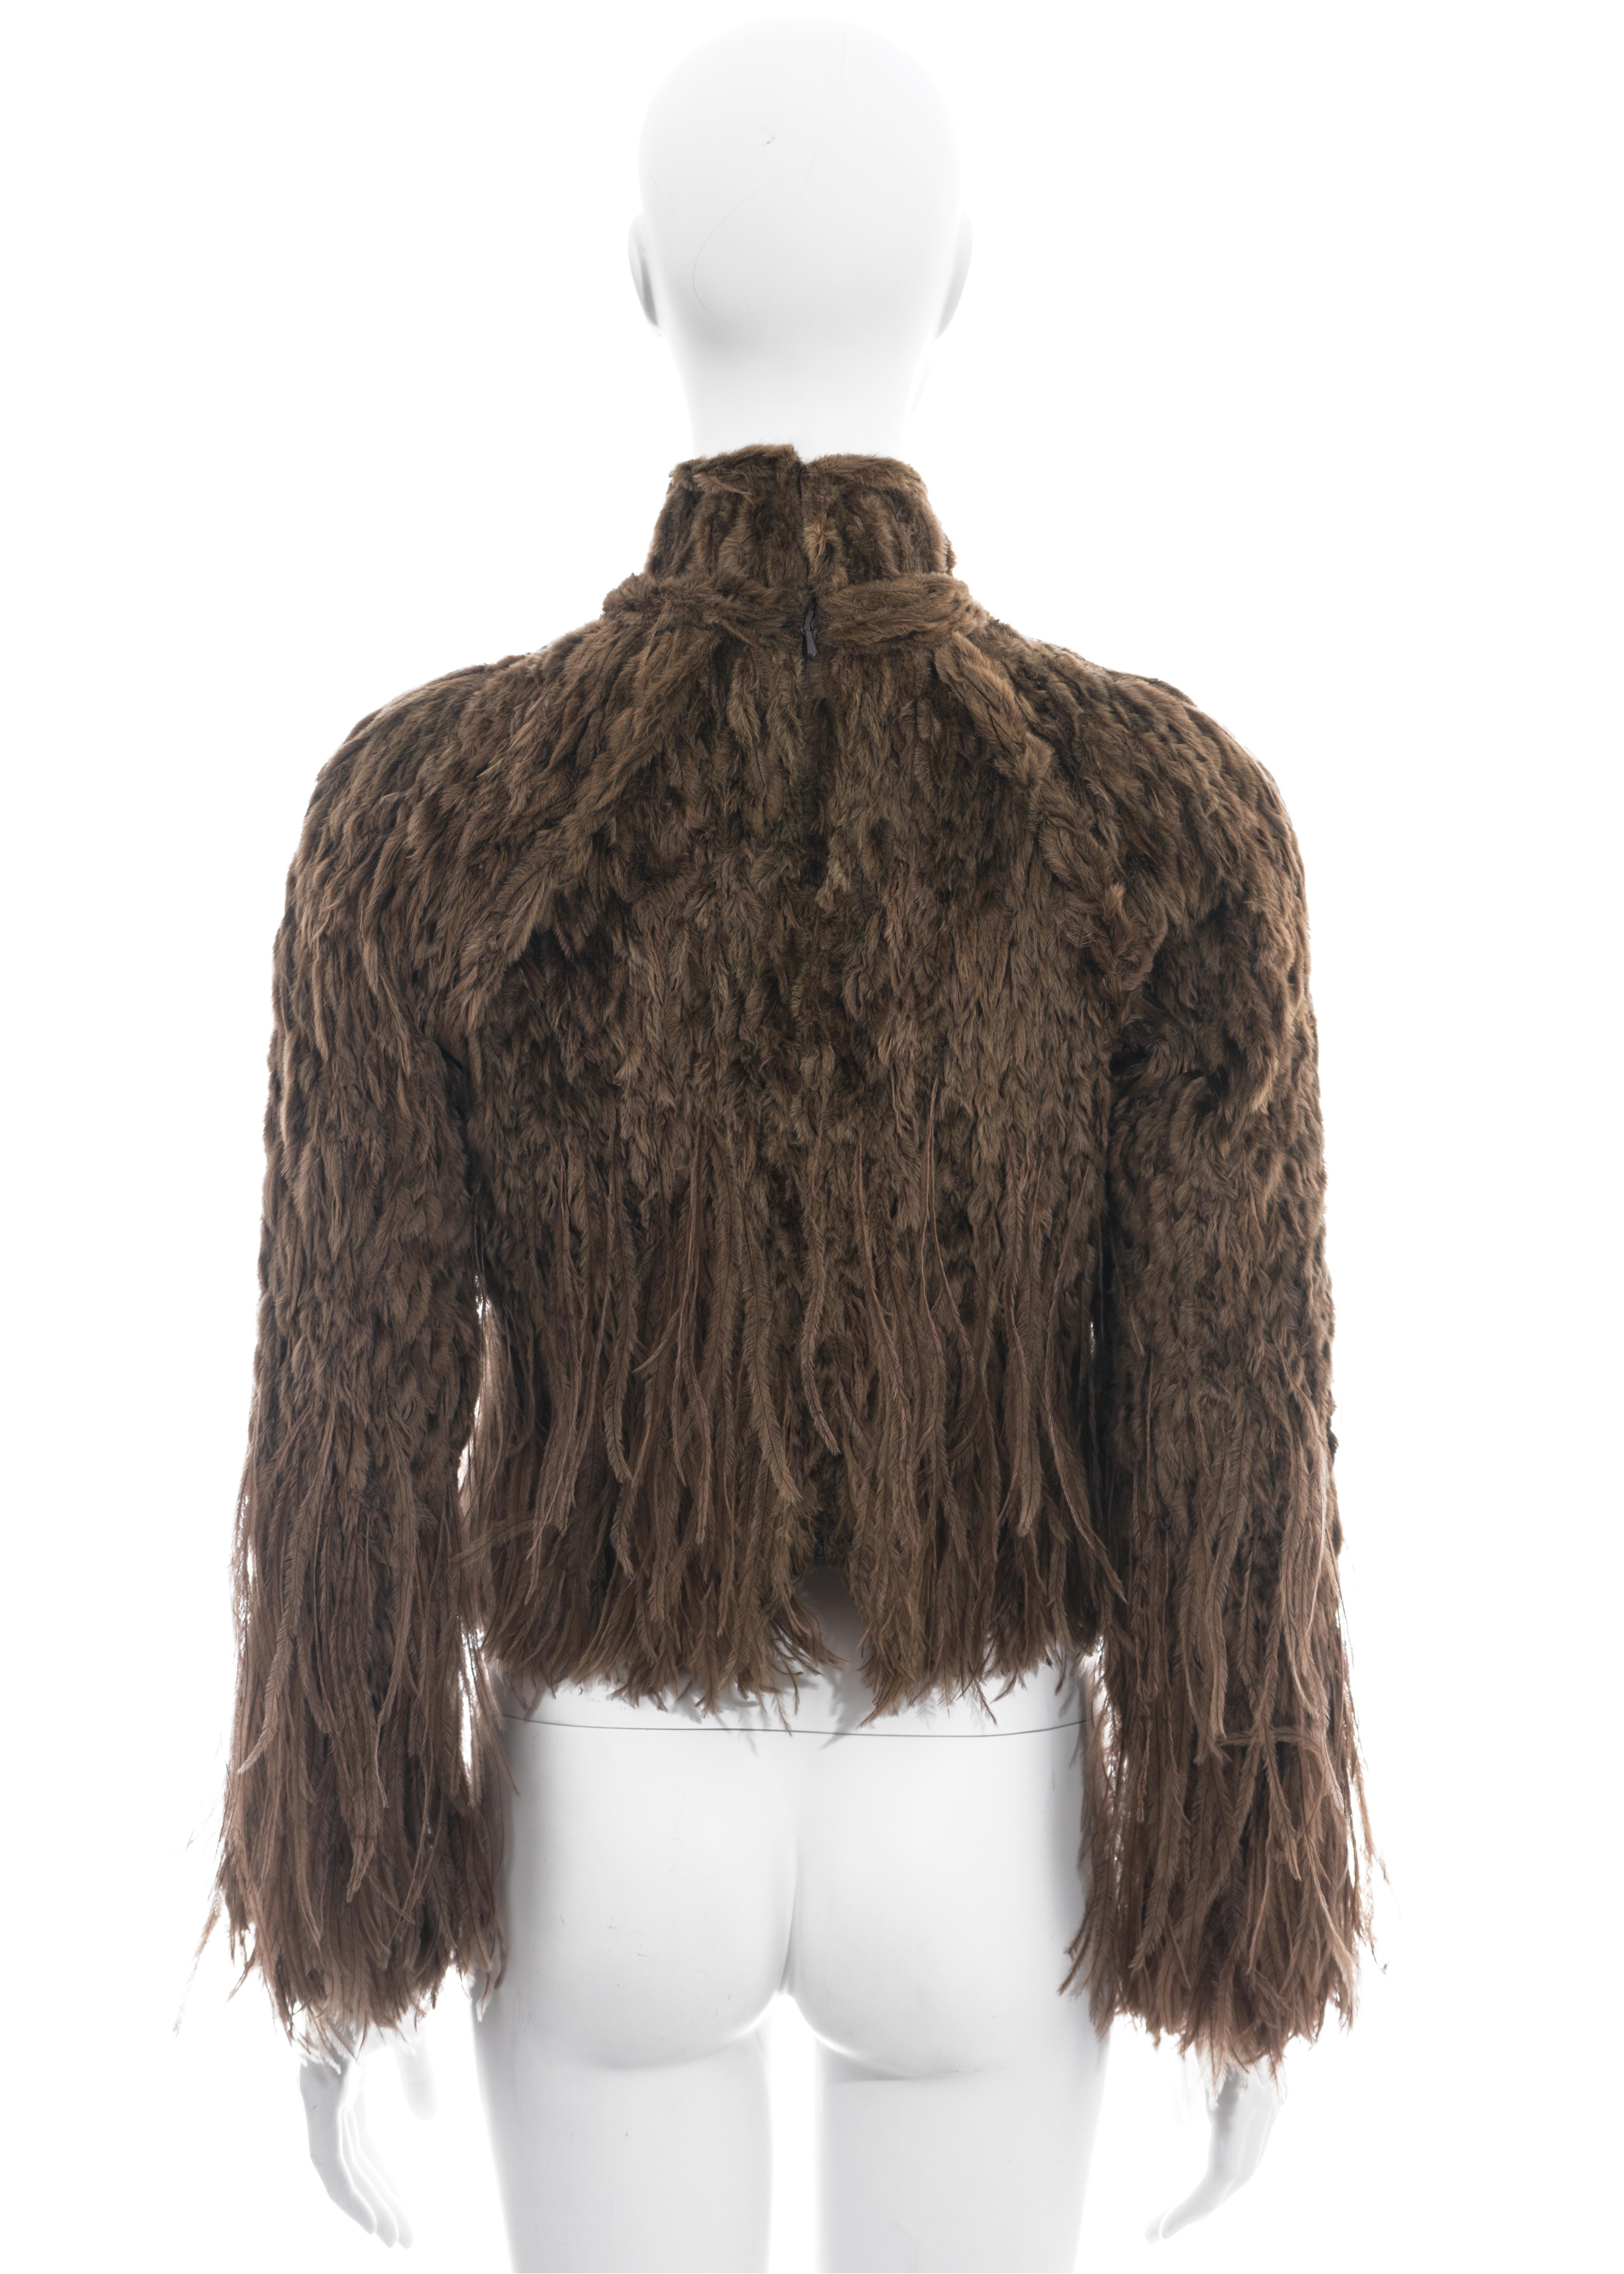 Jean Paul Gaultier Haute Couture brown fur and ostrich feather top, fw 1999 For Sale 1